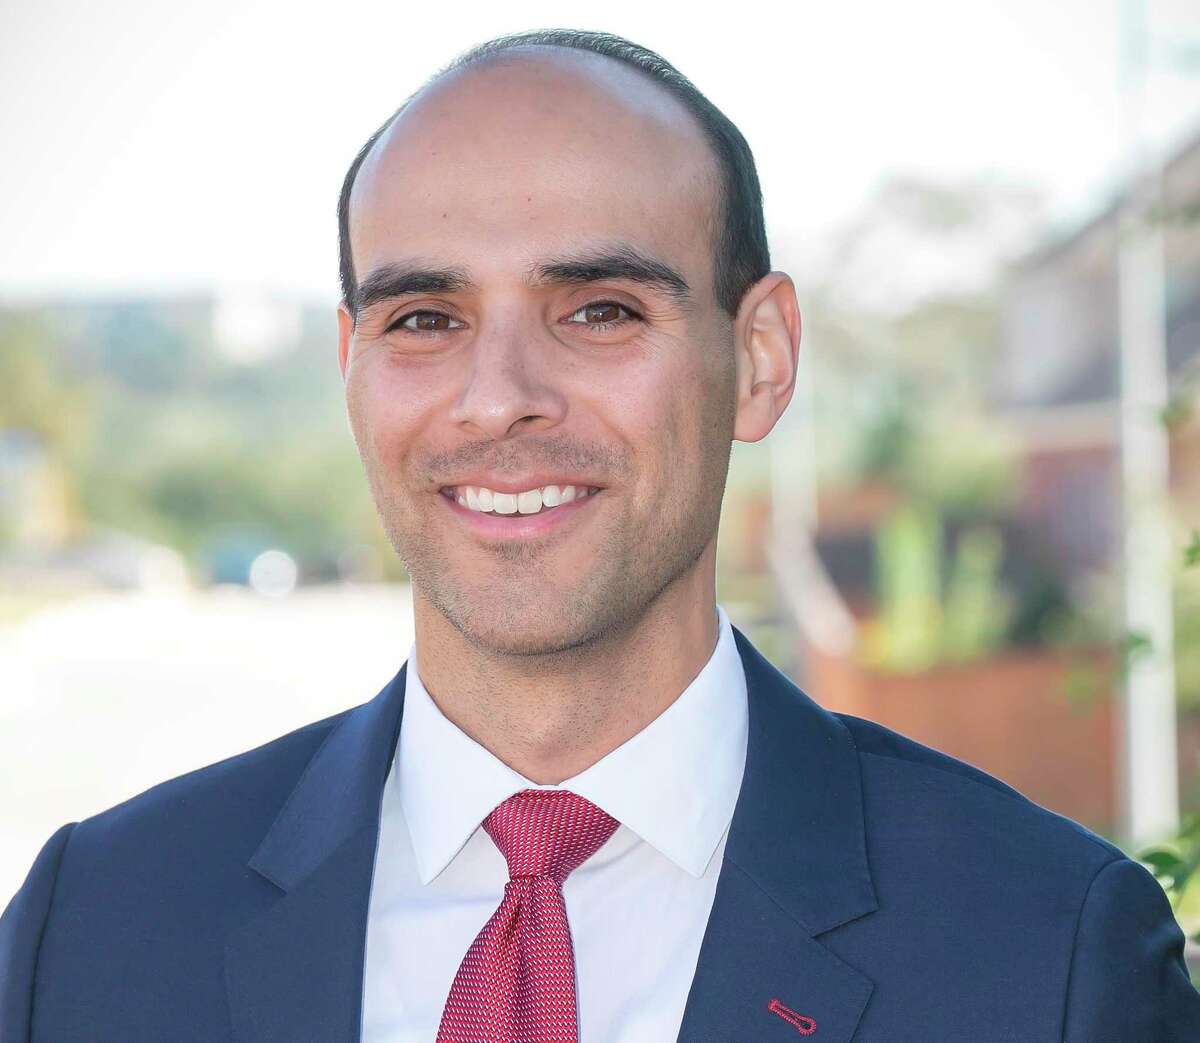 Bexar County felony prosecutor Freddy Ramirez is one of three candidates seeking the Democratic nomination for the Texas Senate District 19 seat. Whoever wins the Democratic Primary on March 3 will face Republican incumbent Pete Flores in November’s general election.